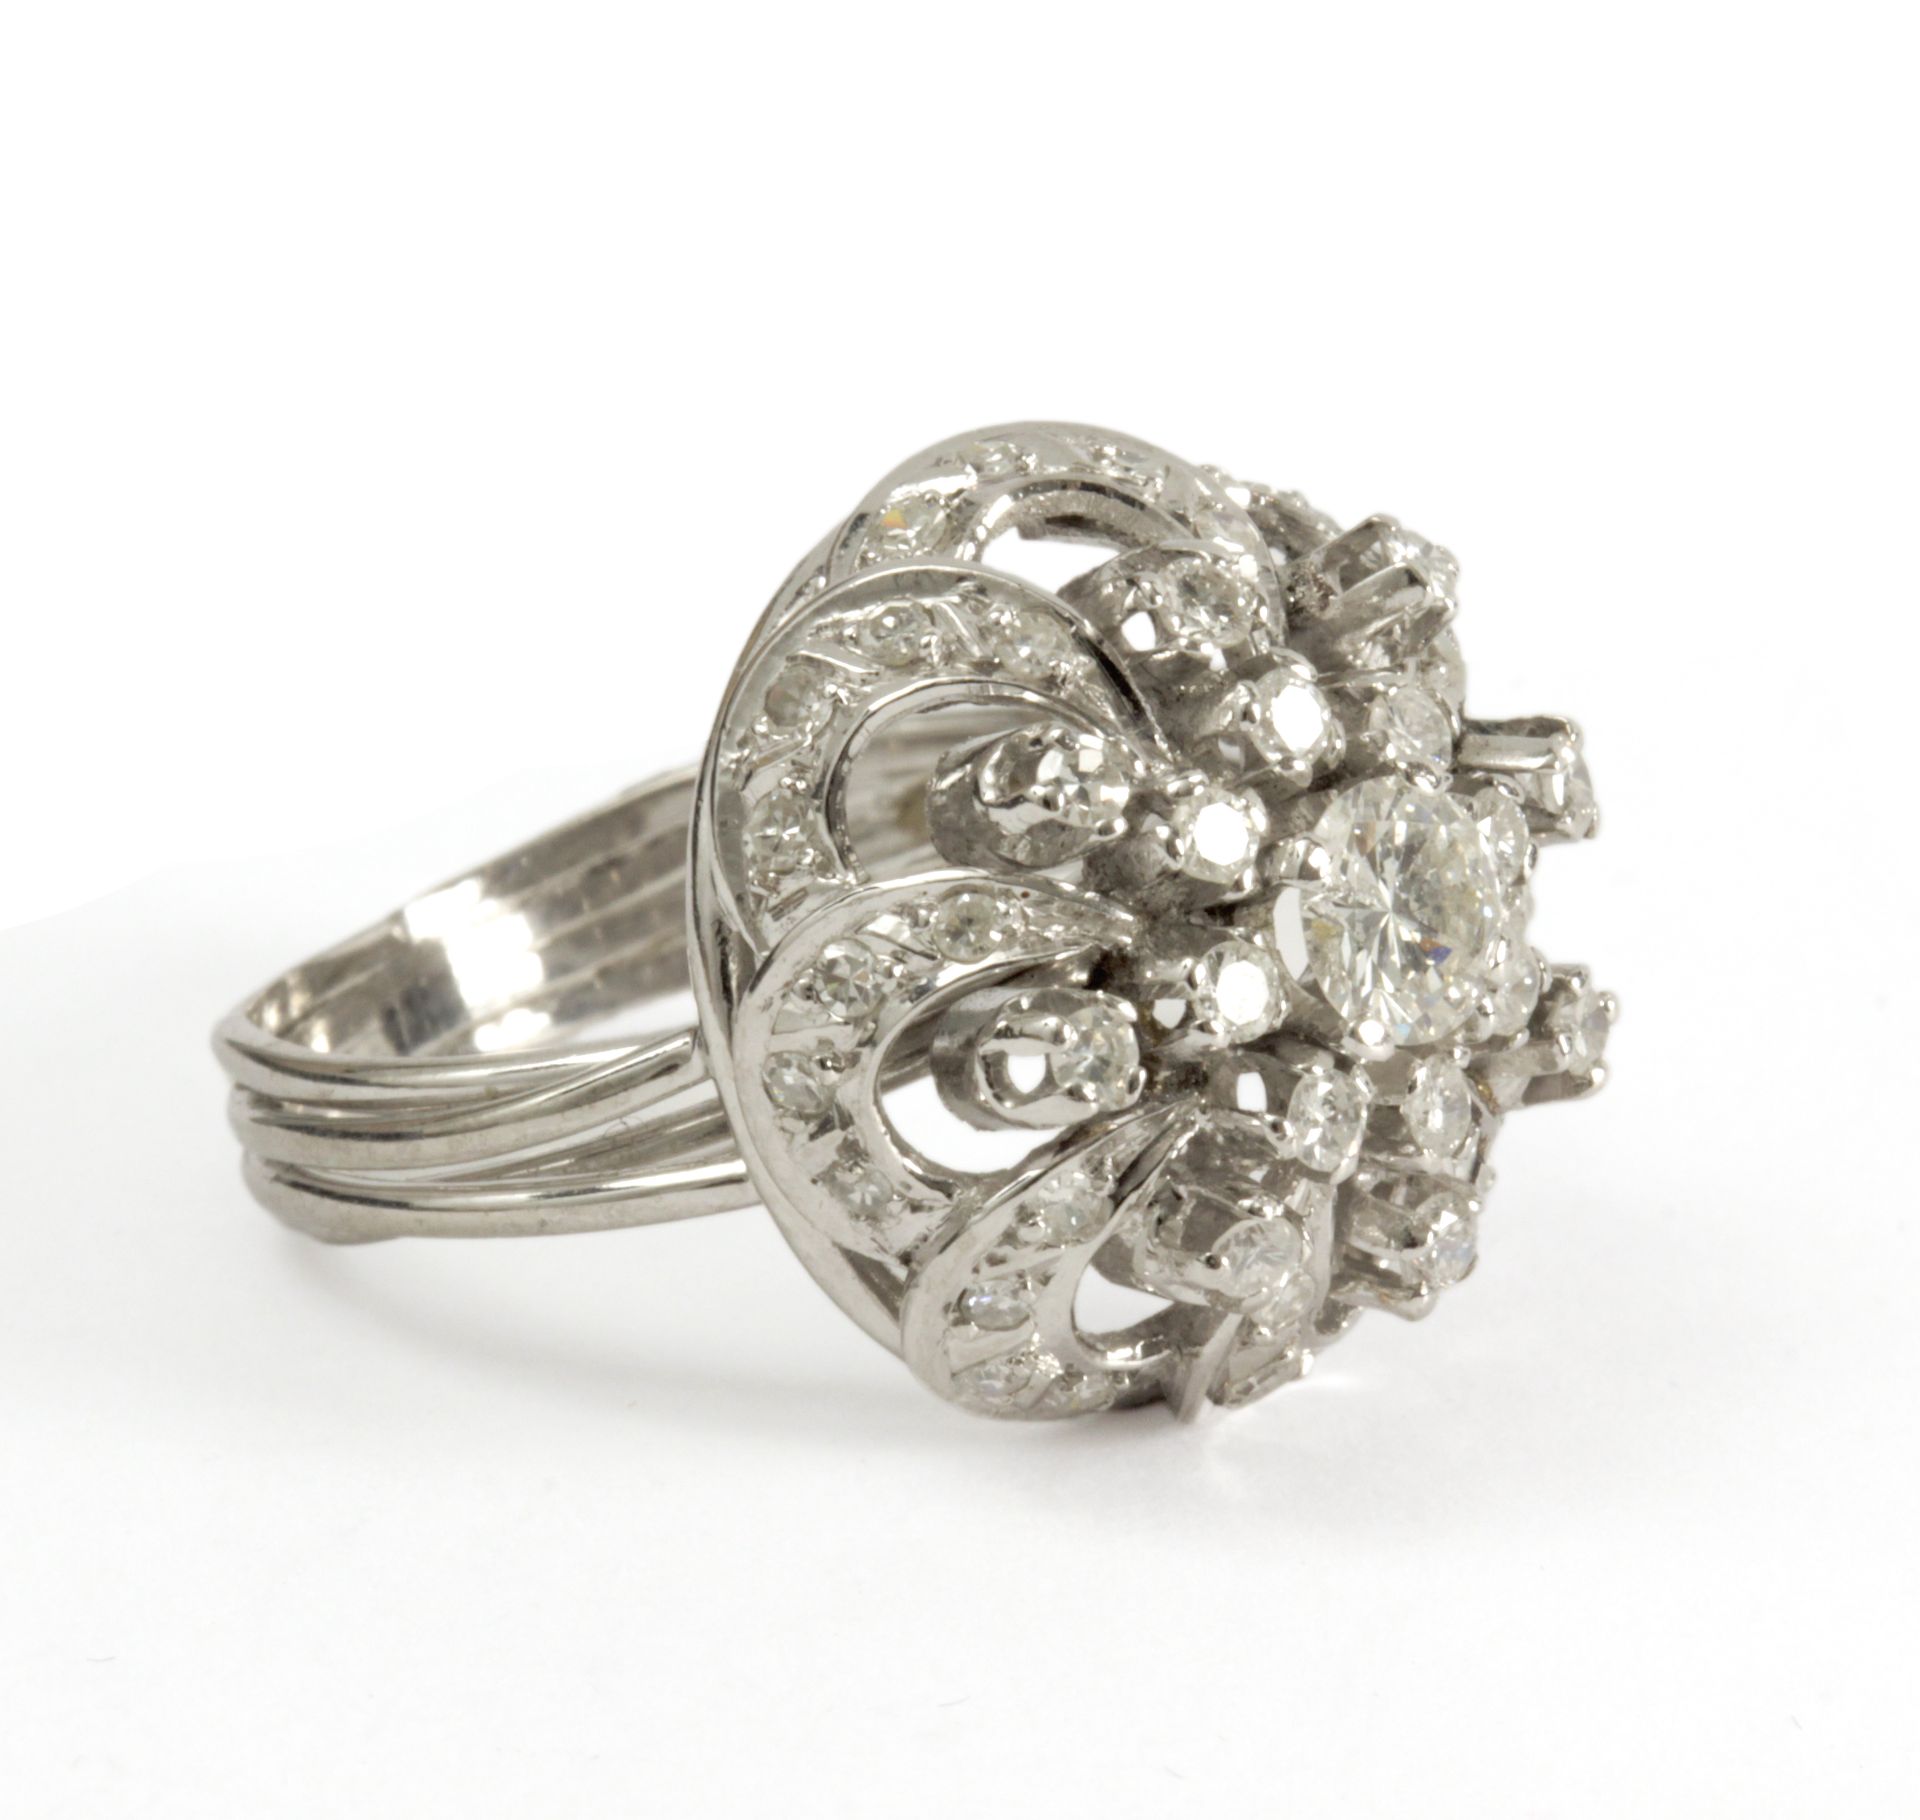 A brilliant cut diamonds bombe ring circa 1950 with a platinum setting - Image 2 of 3